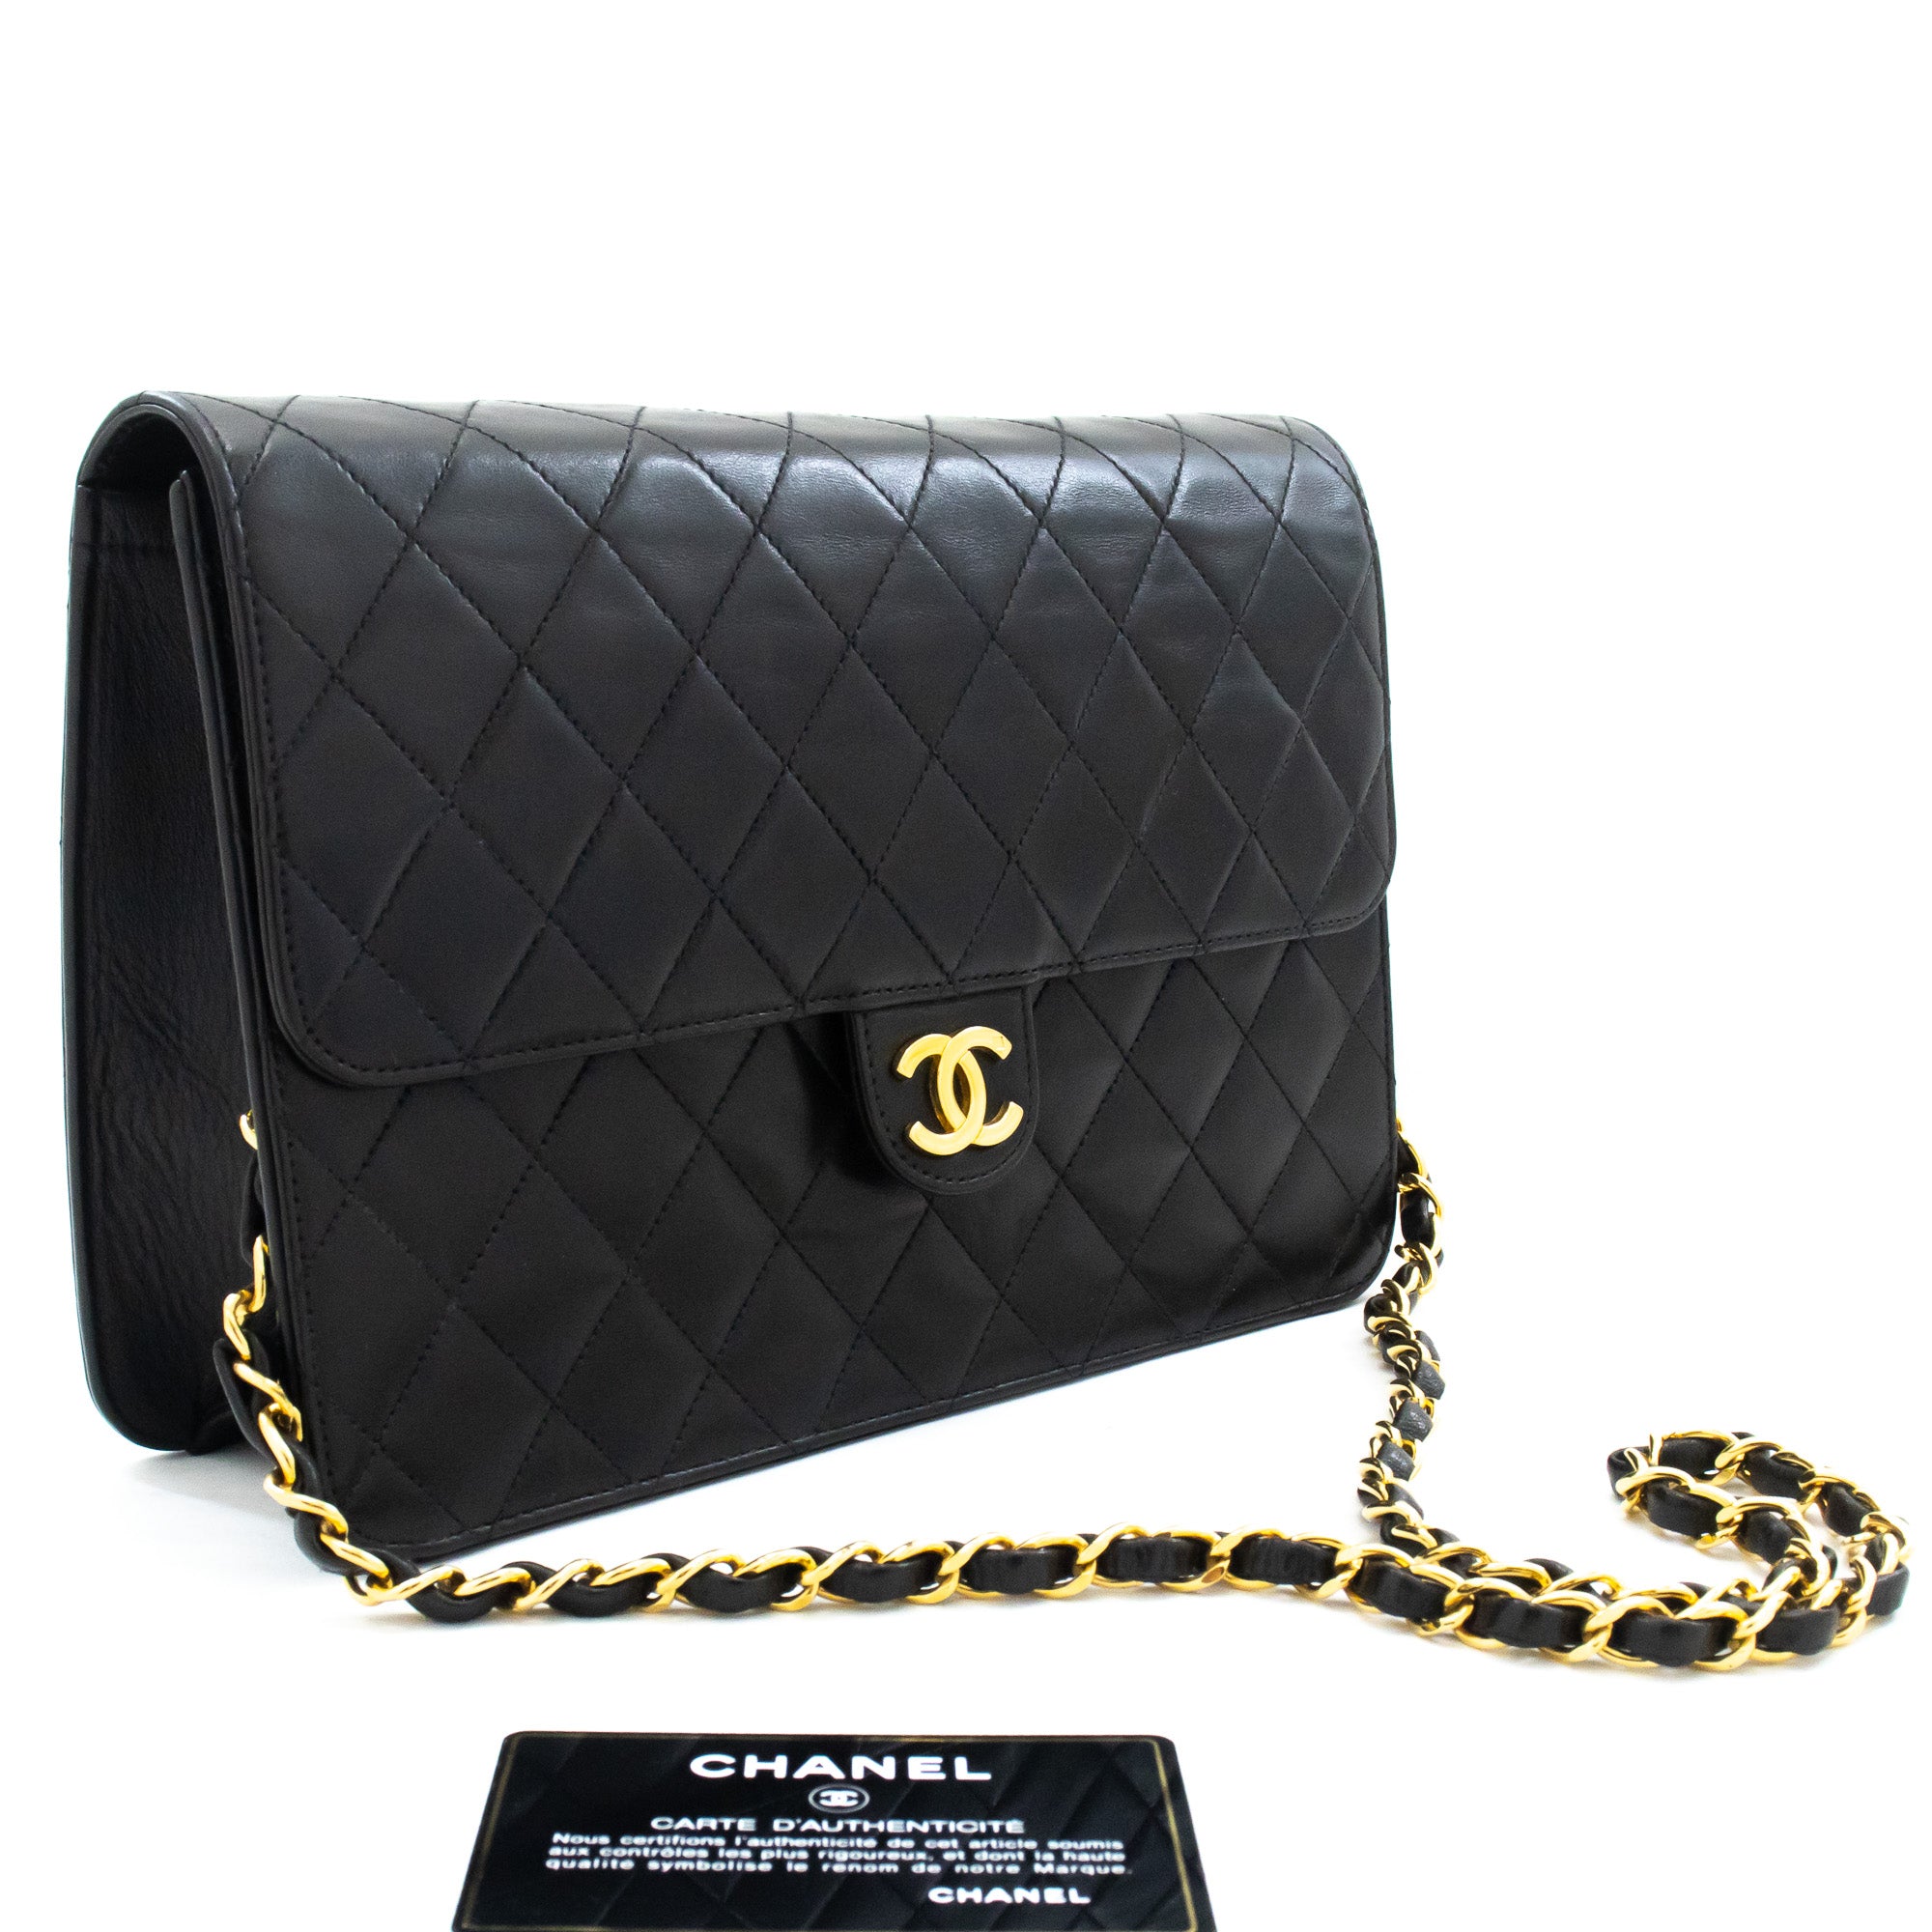 Authentic Chanel Quilted Lambskin Hobo Bag